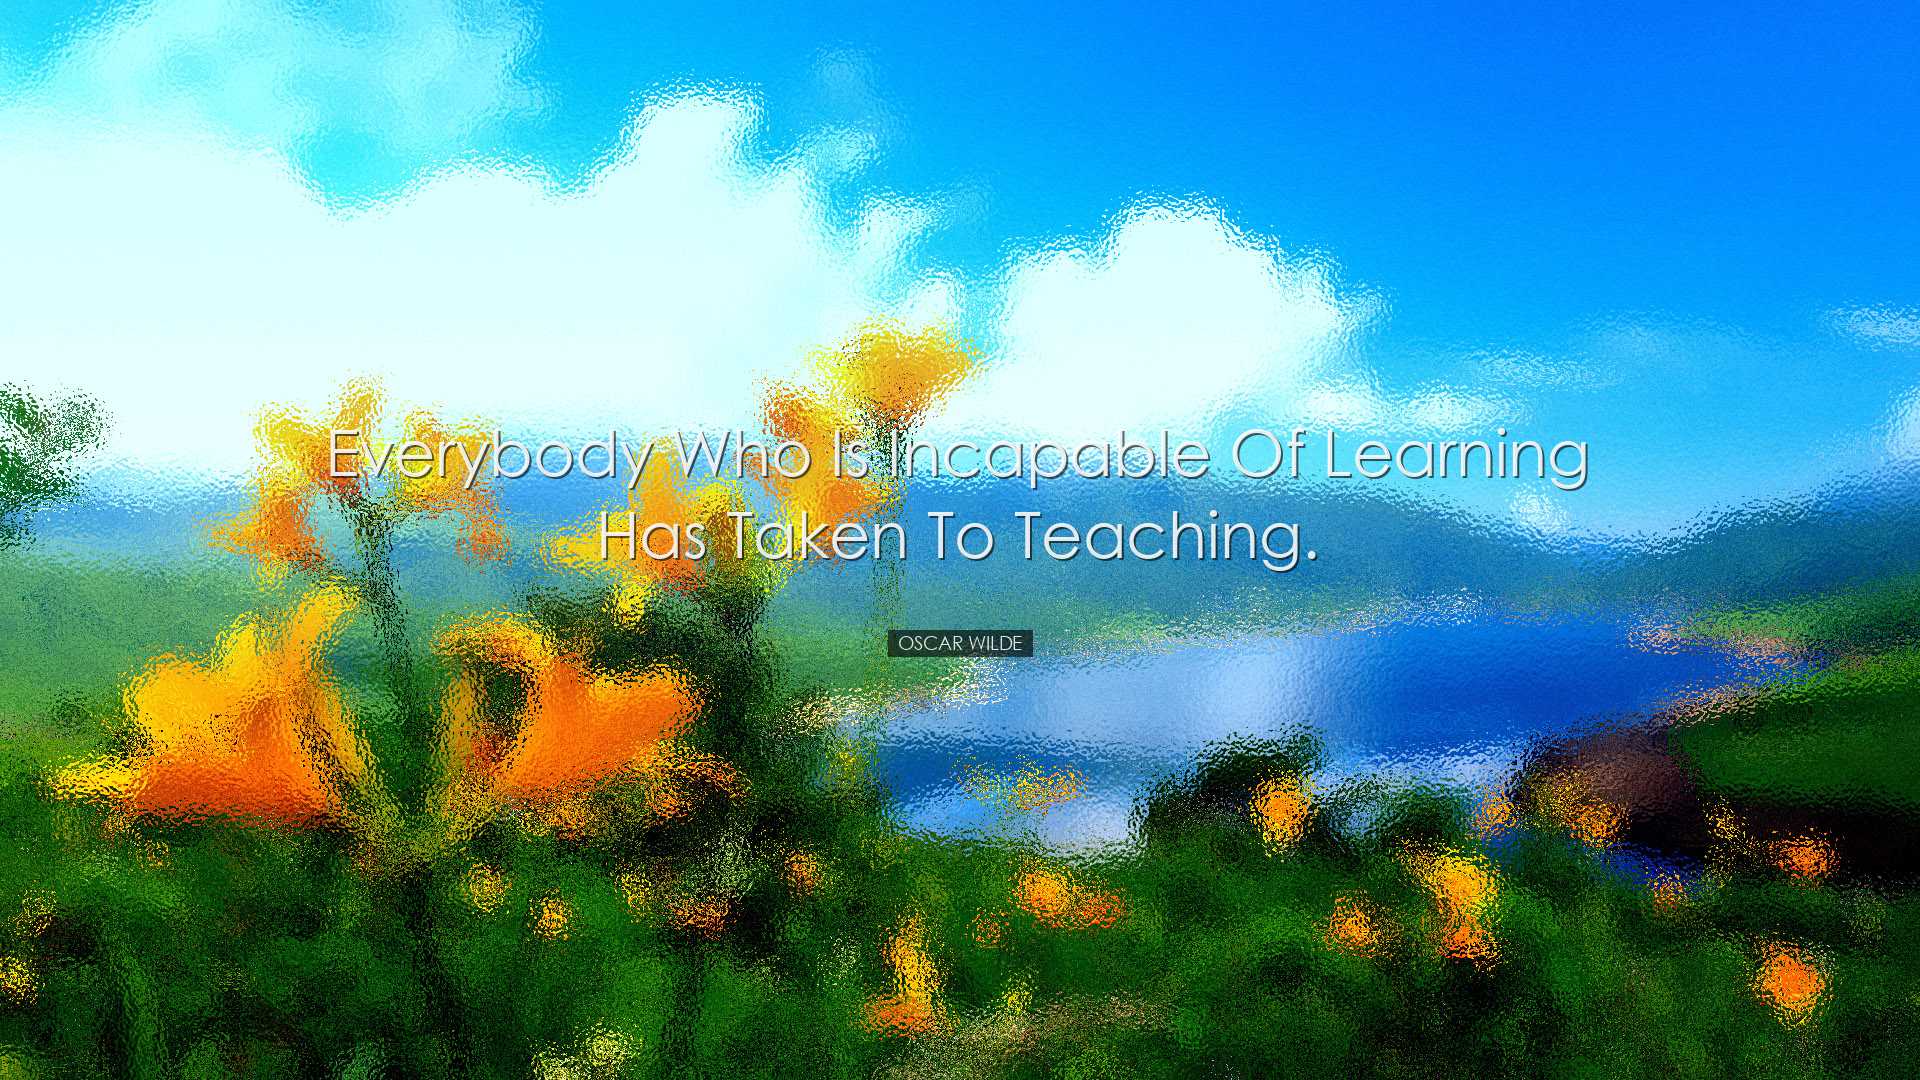 Everybody who is incapable of learning has taken to teaching. - Os